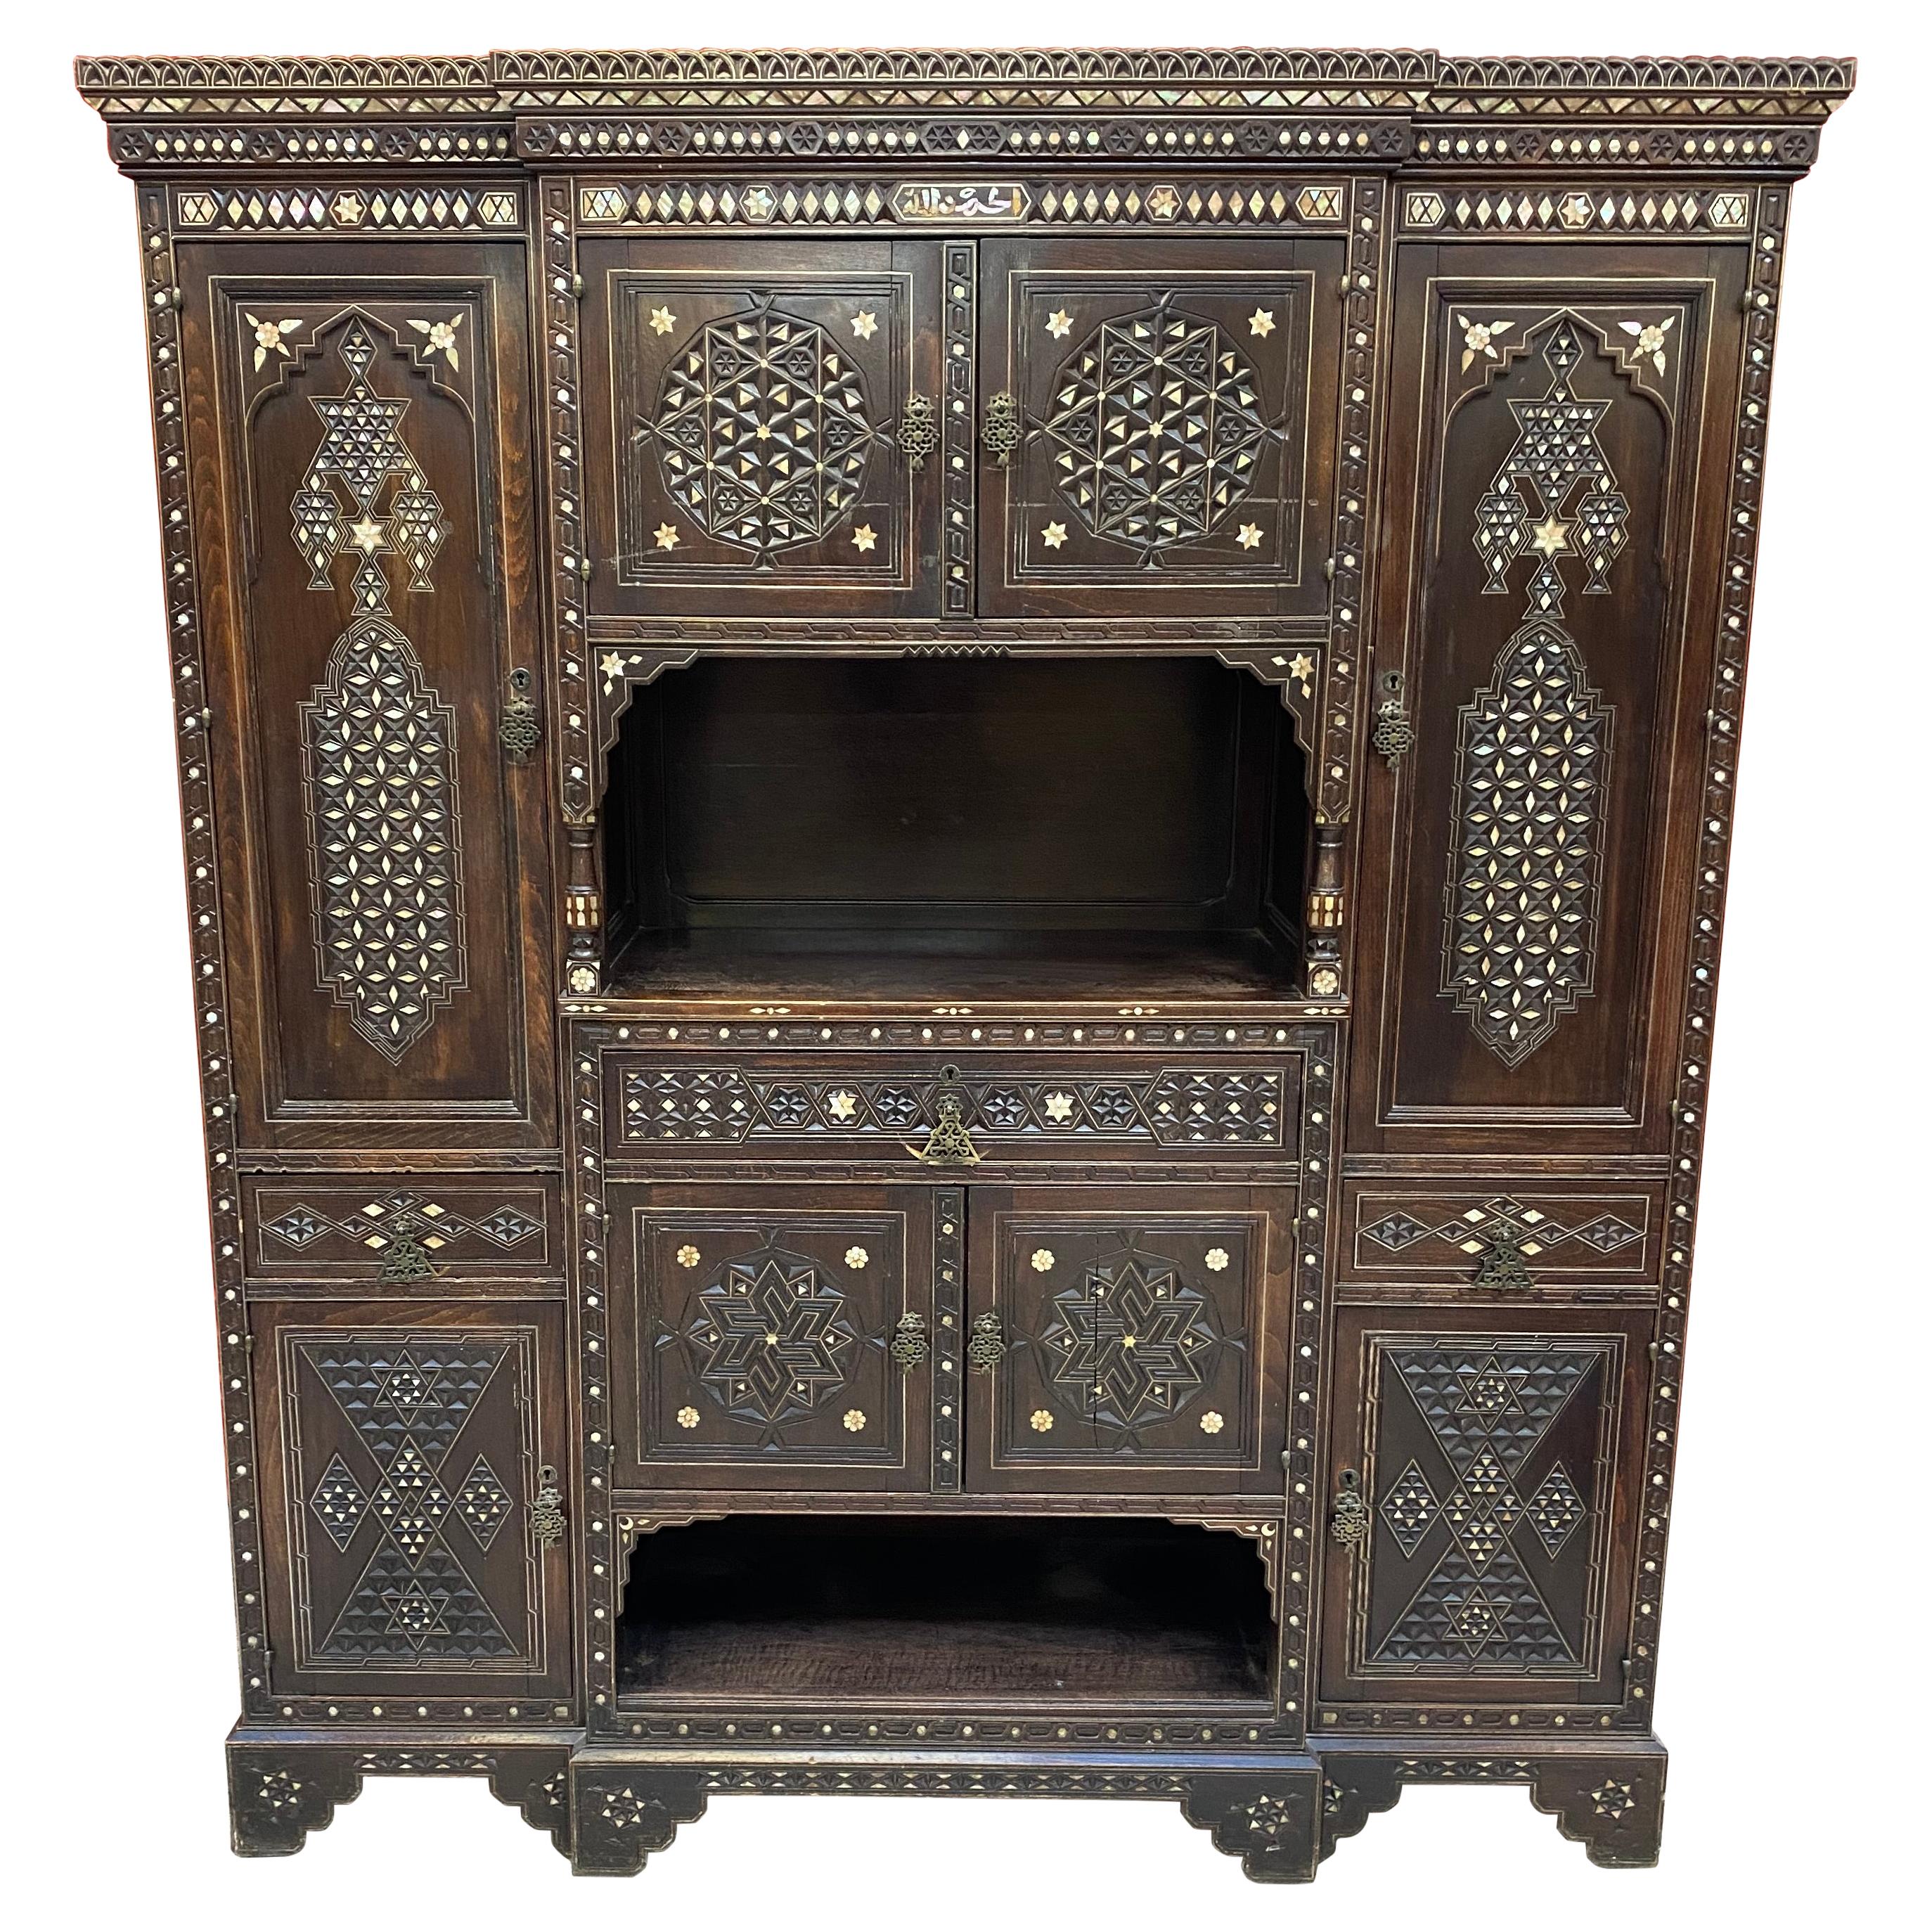 Large Oriental-Style Sideboard in carved Wood, with Mother-of-Pearl Inlay, 1880